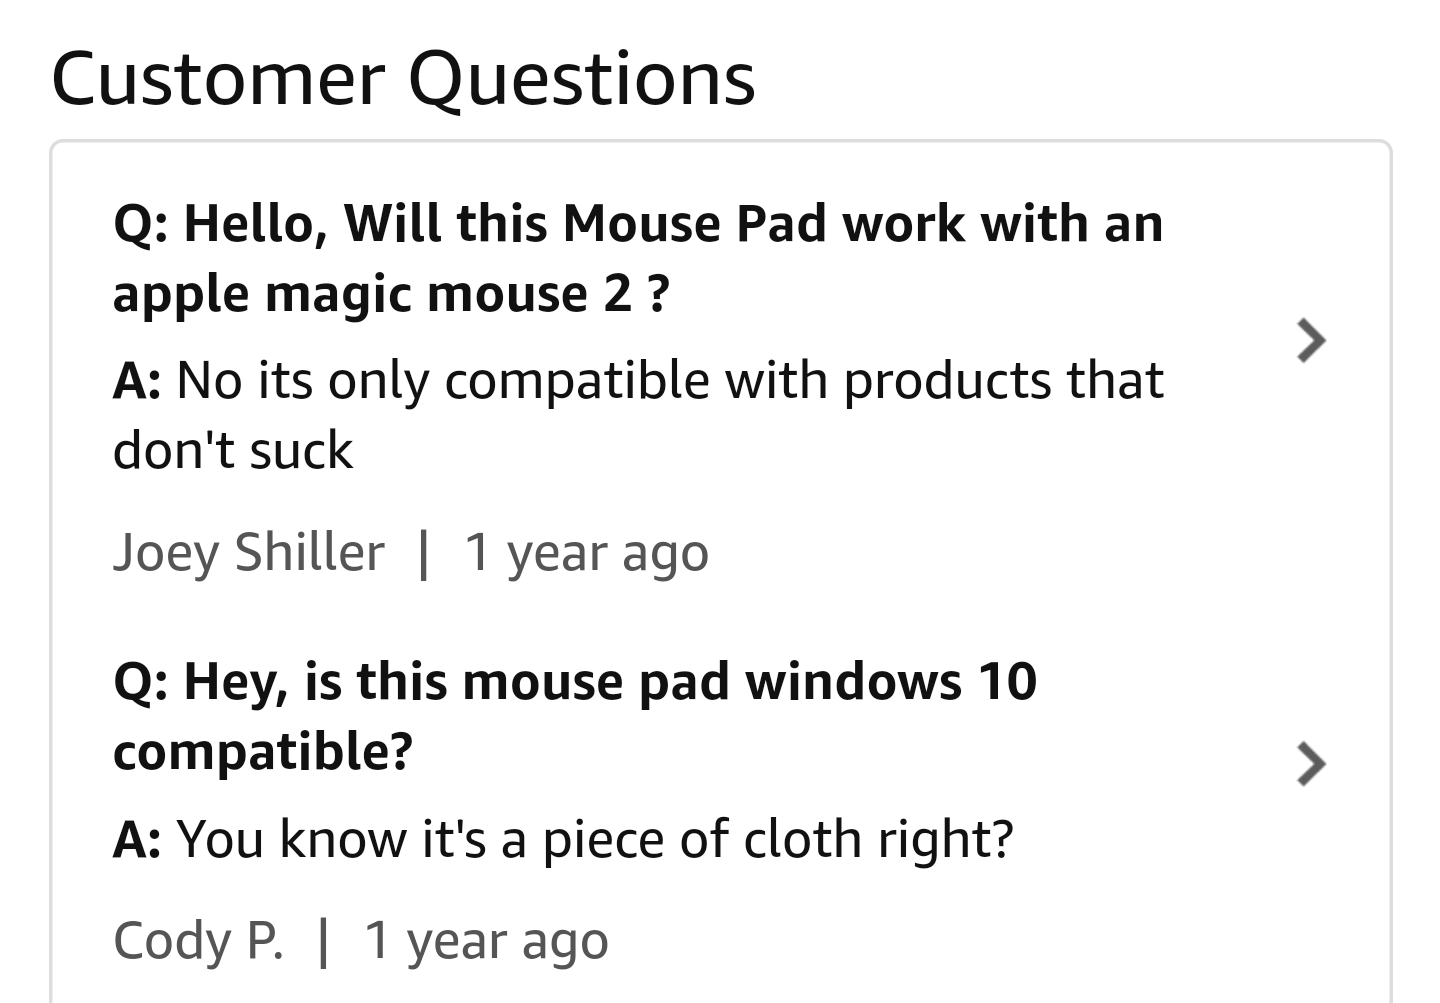 Was browsing Mouse Mats on Amazon when suddenly..